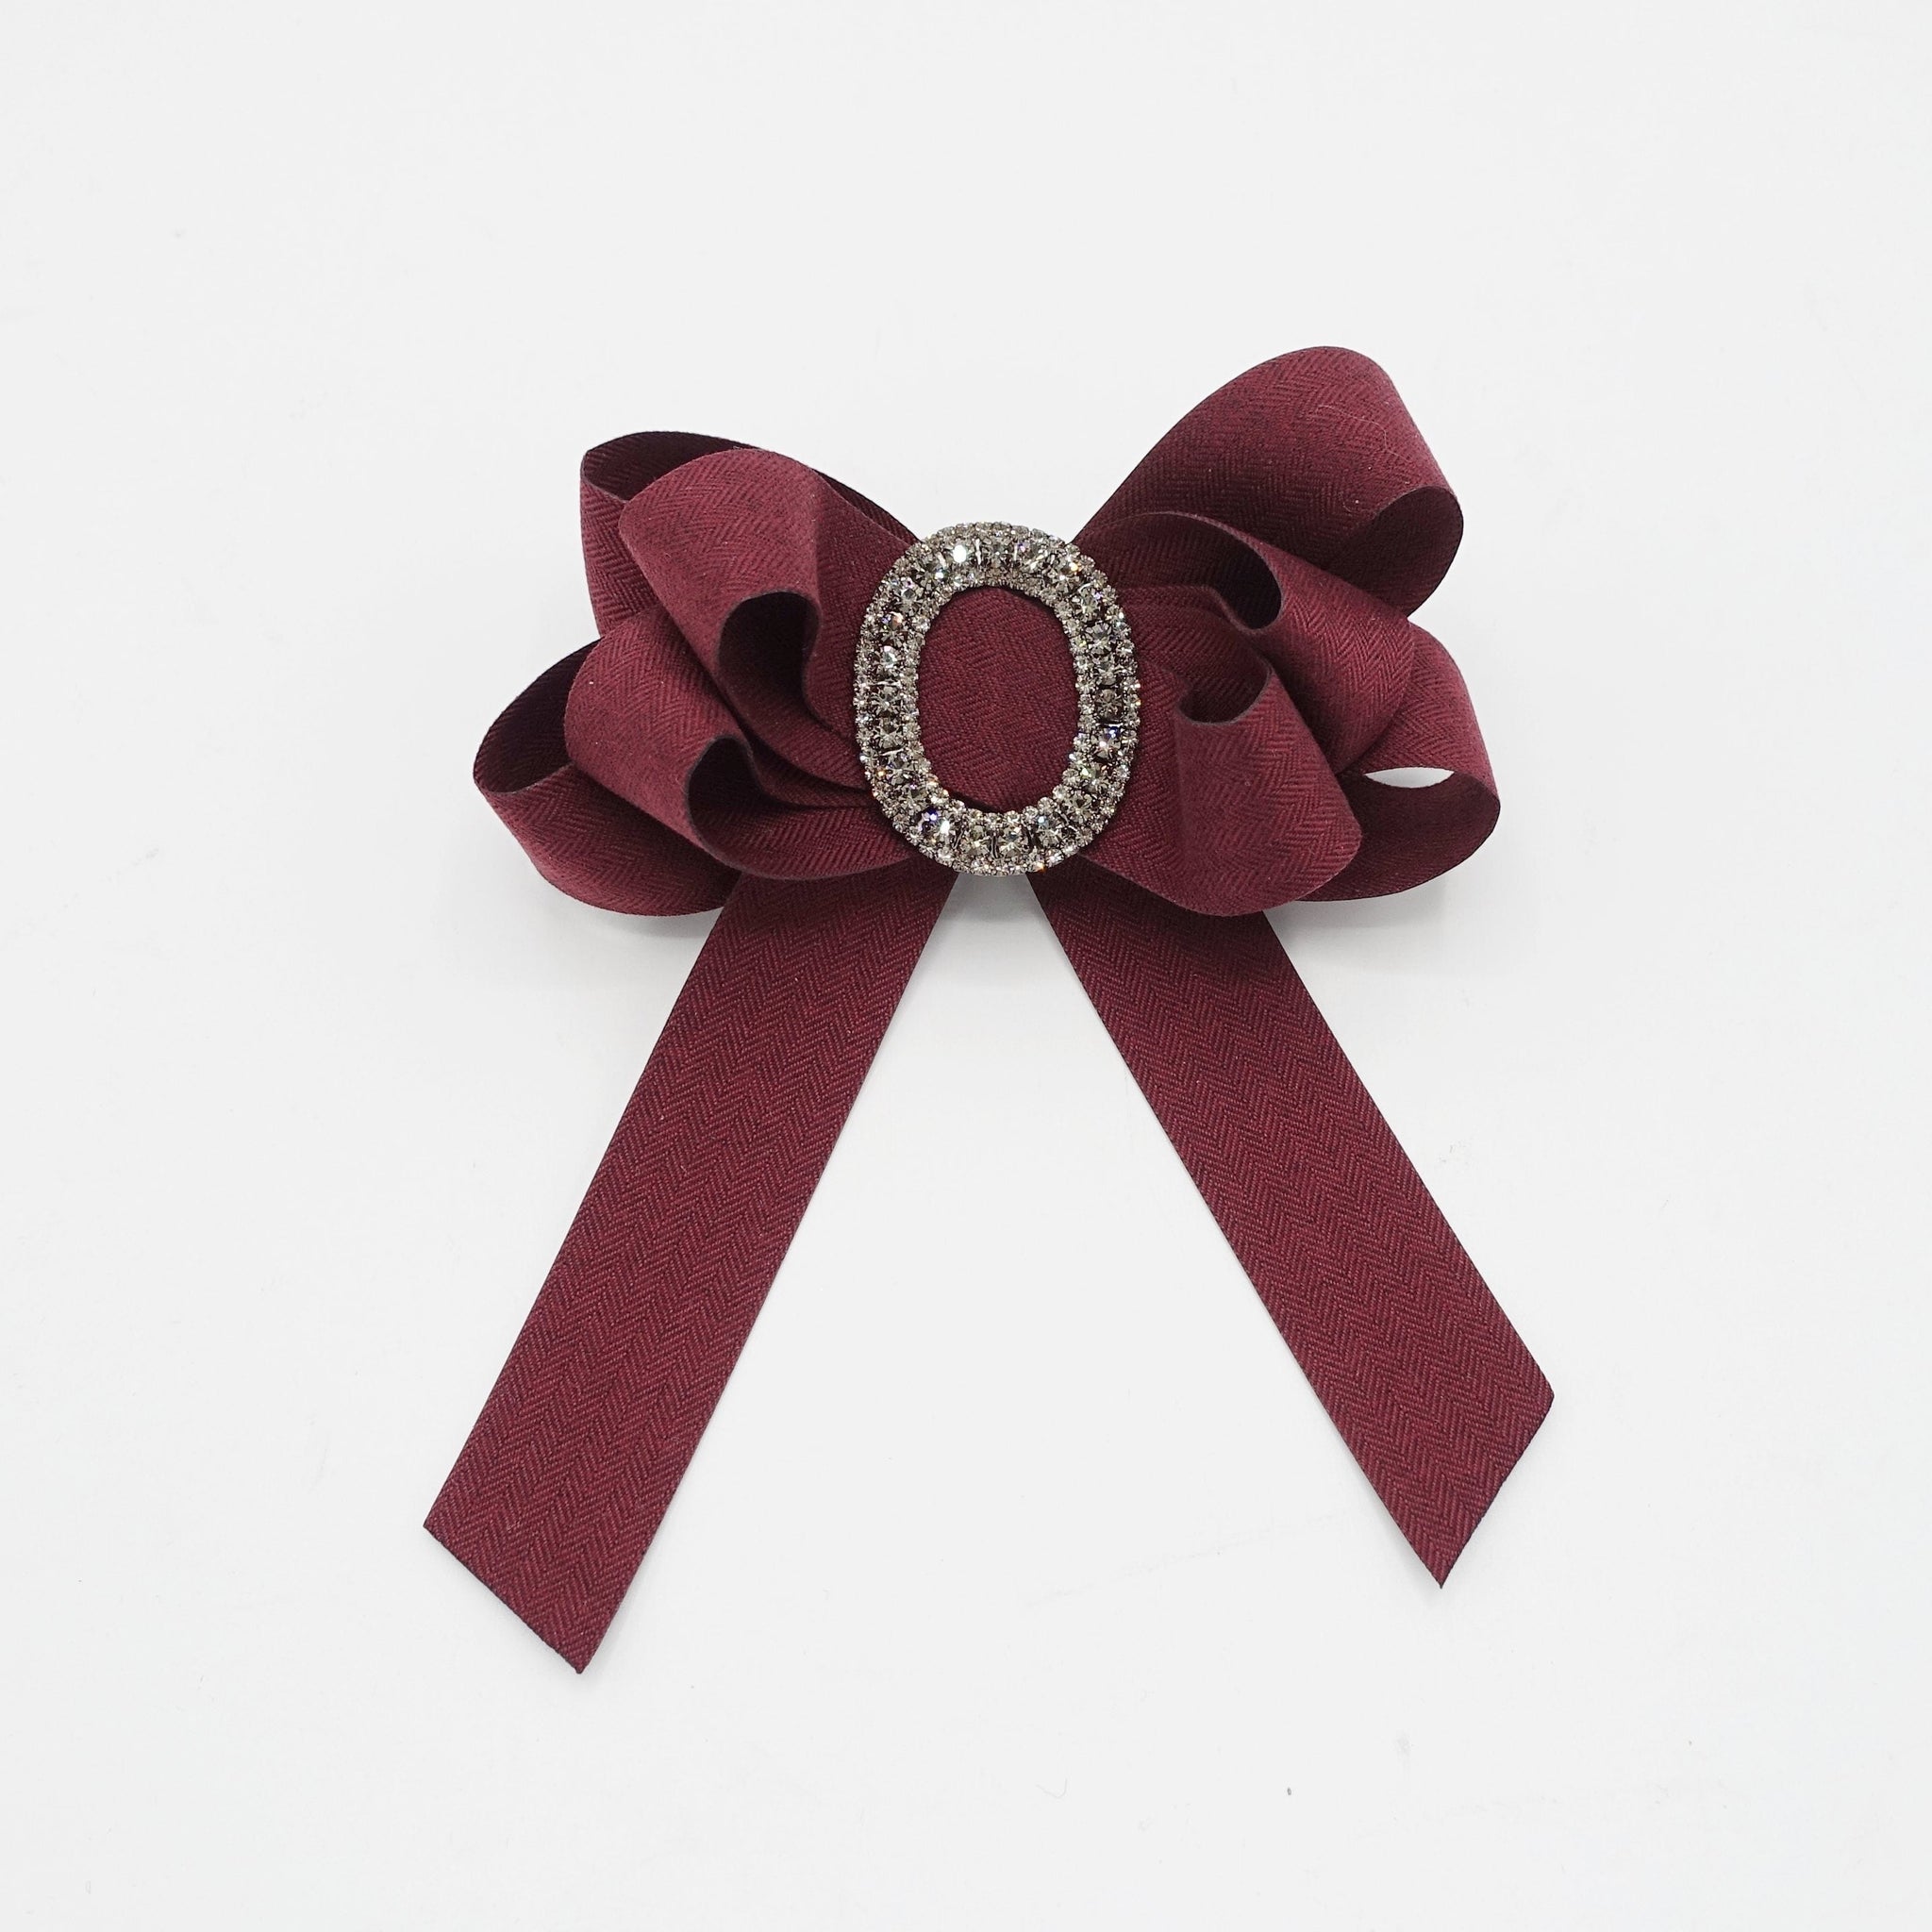 veryshine.com Barrette (Bow) Red wine jeweled buckle hair bow layered tail bow french barrette women hair accessory